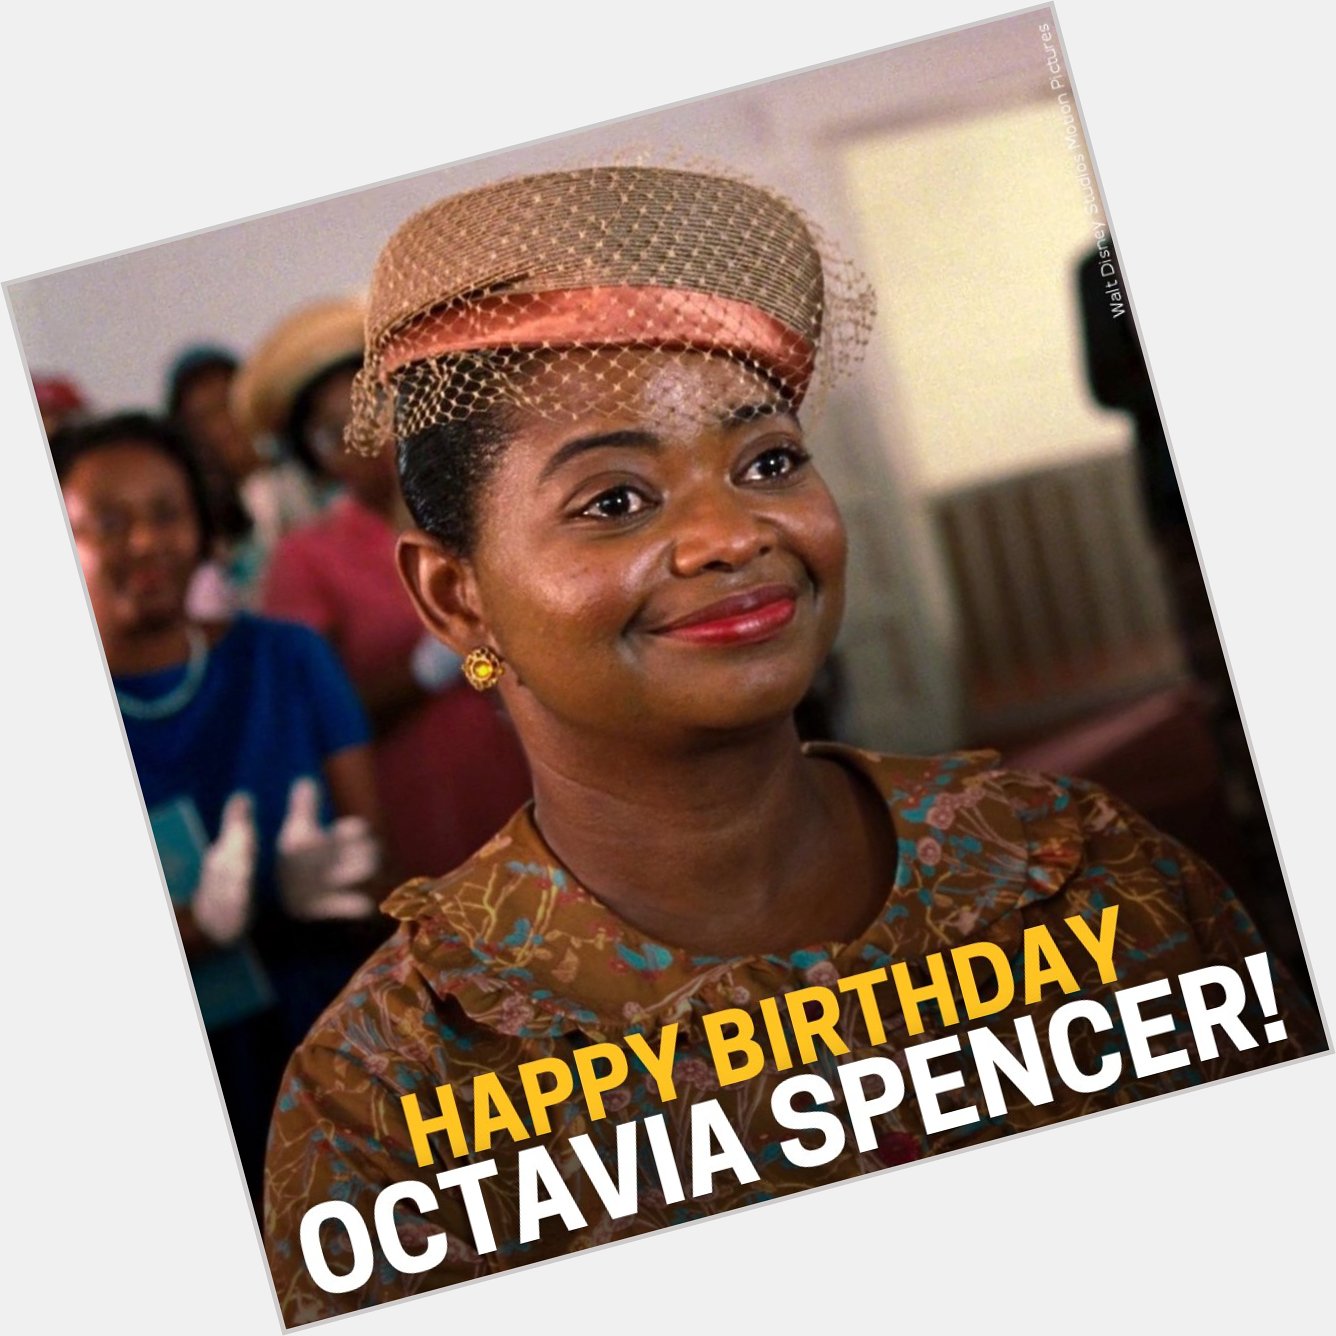 We will never forget what you put inside that pie Happy Birthday to our forever Minnie, Octavia Spencer!! 